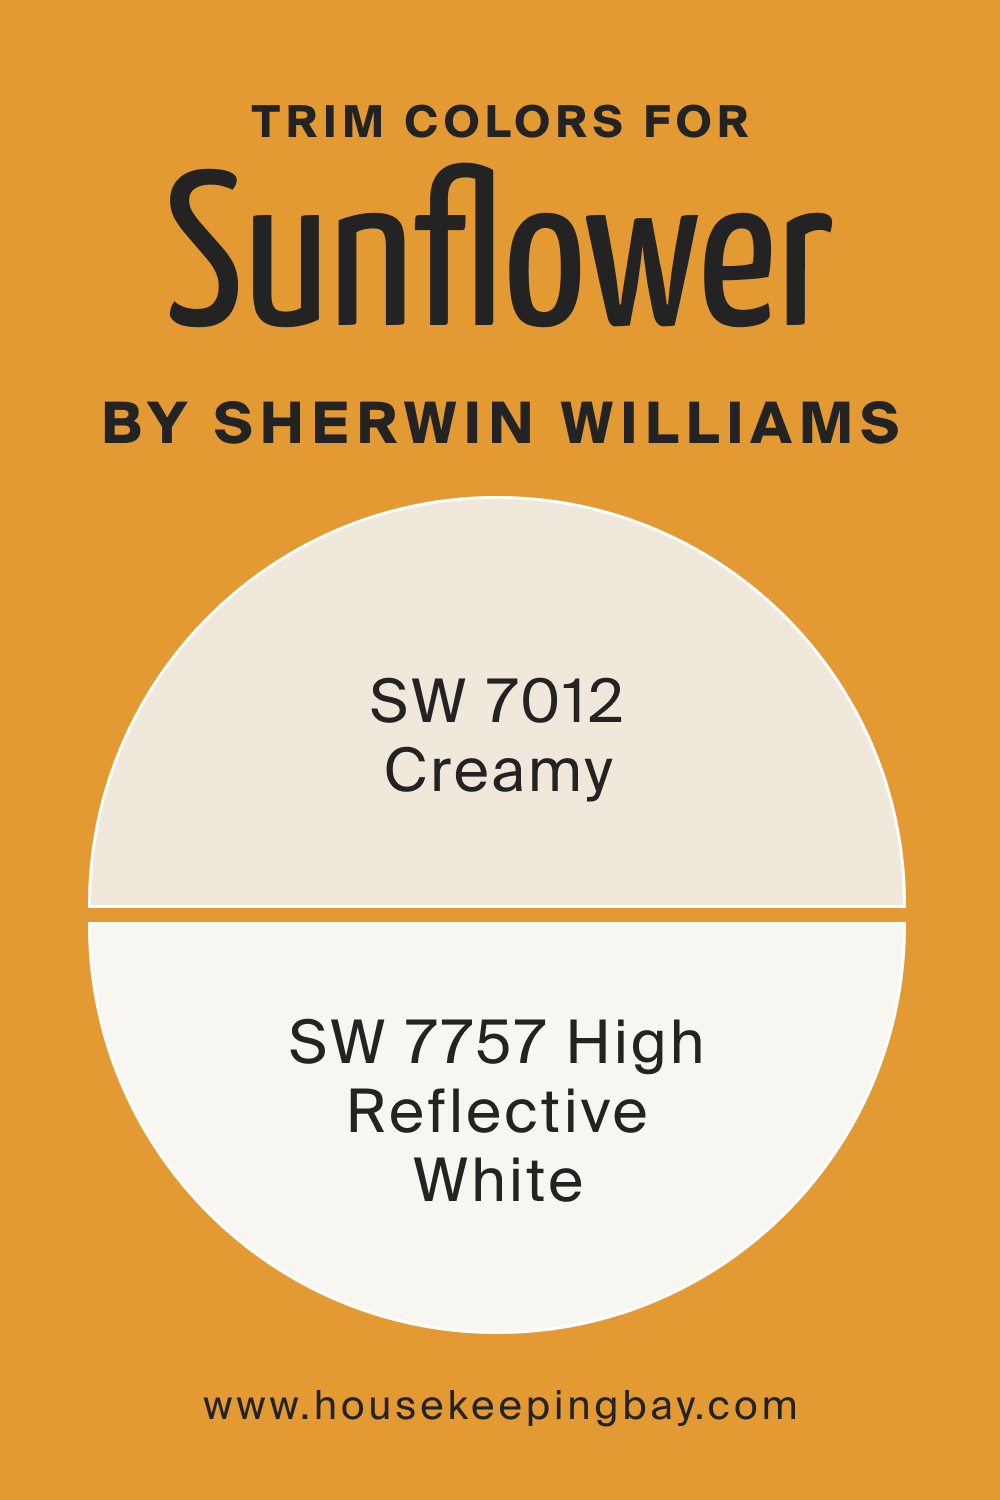 Trim Colors of Sunflower SW 6678 by Sherwin Williams